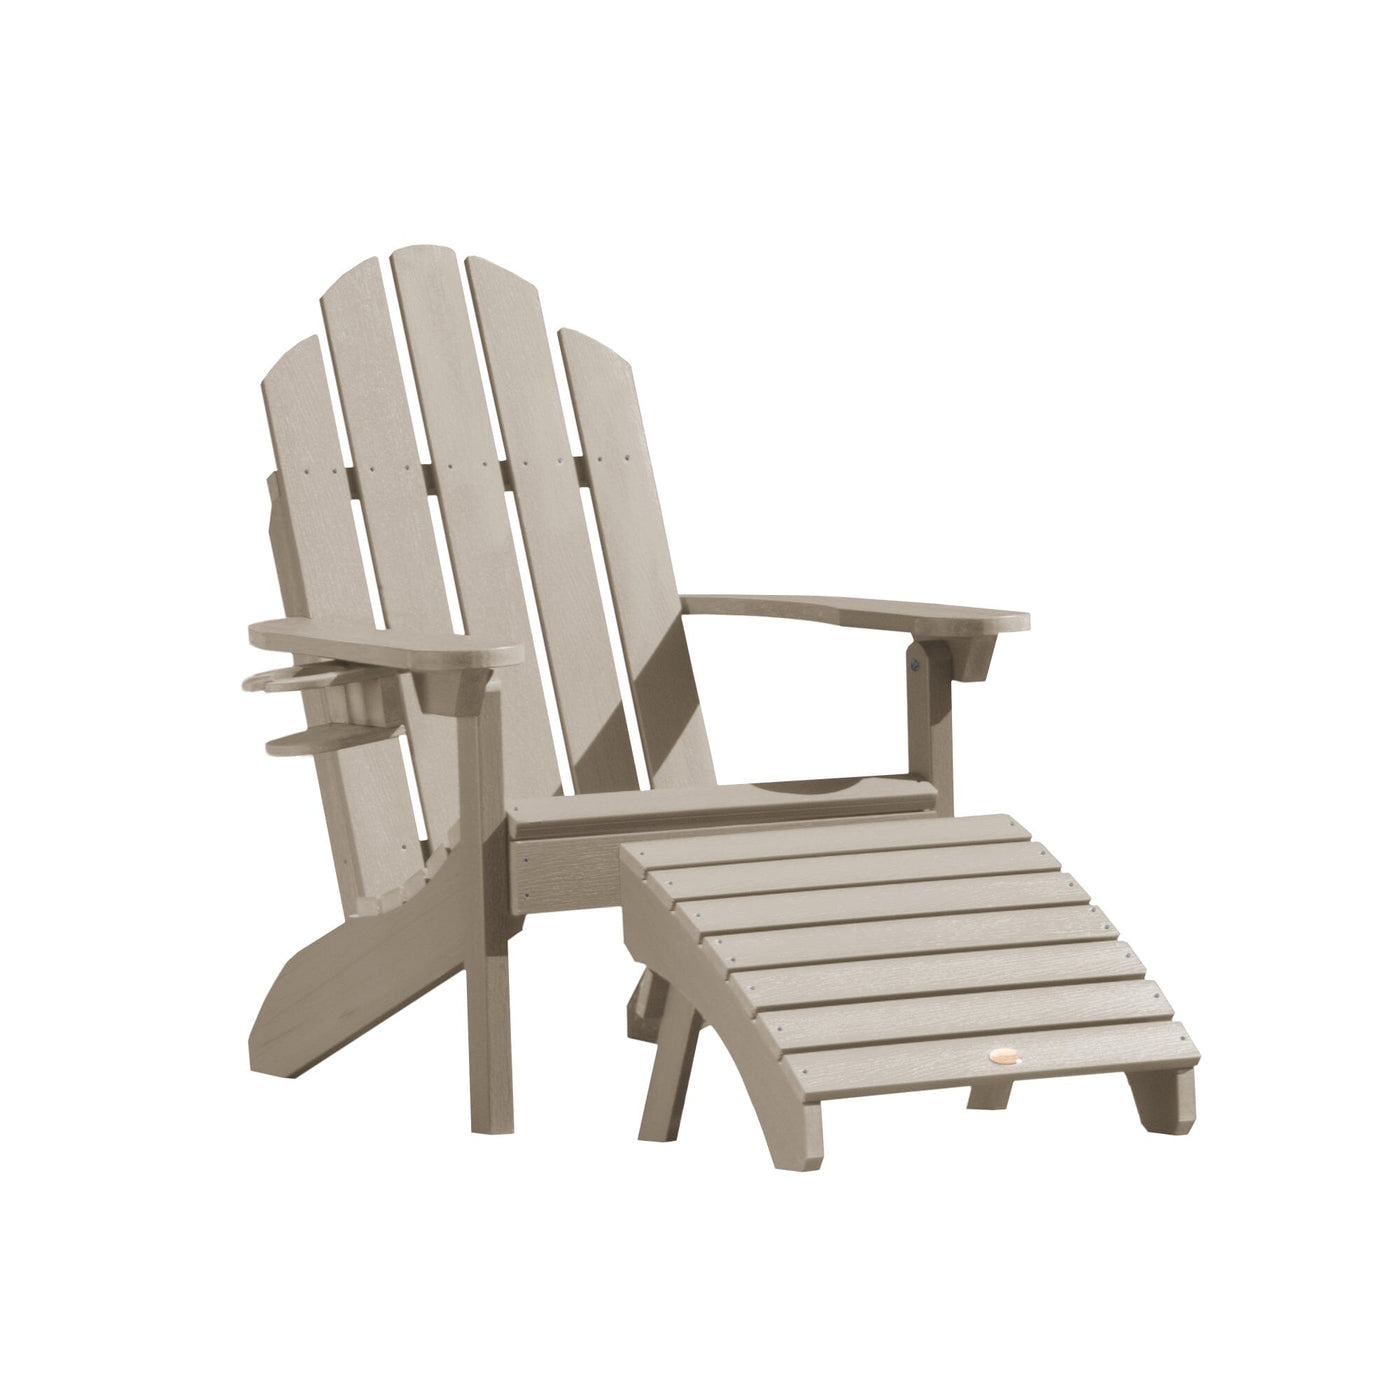 Classic Westport Adirondack Chair with Cup Holder & Folding Adirondack Ottoman Adirondack Chairs Highwood USA Woodland Brown 